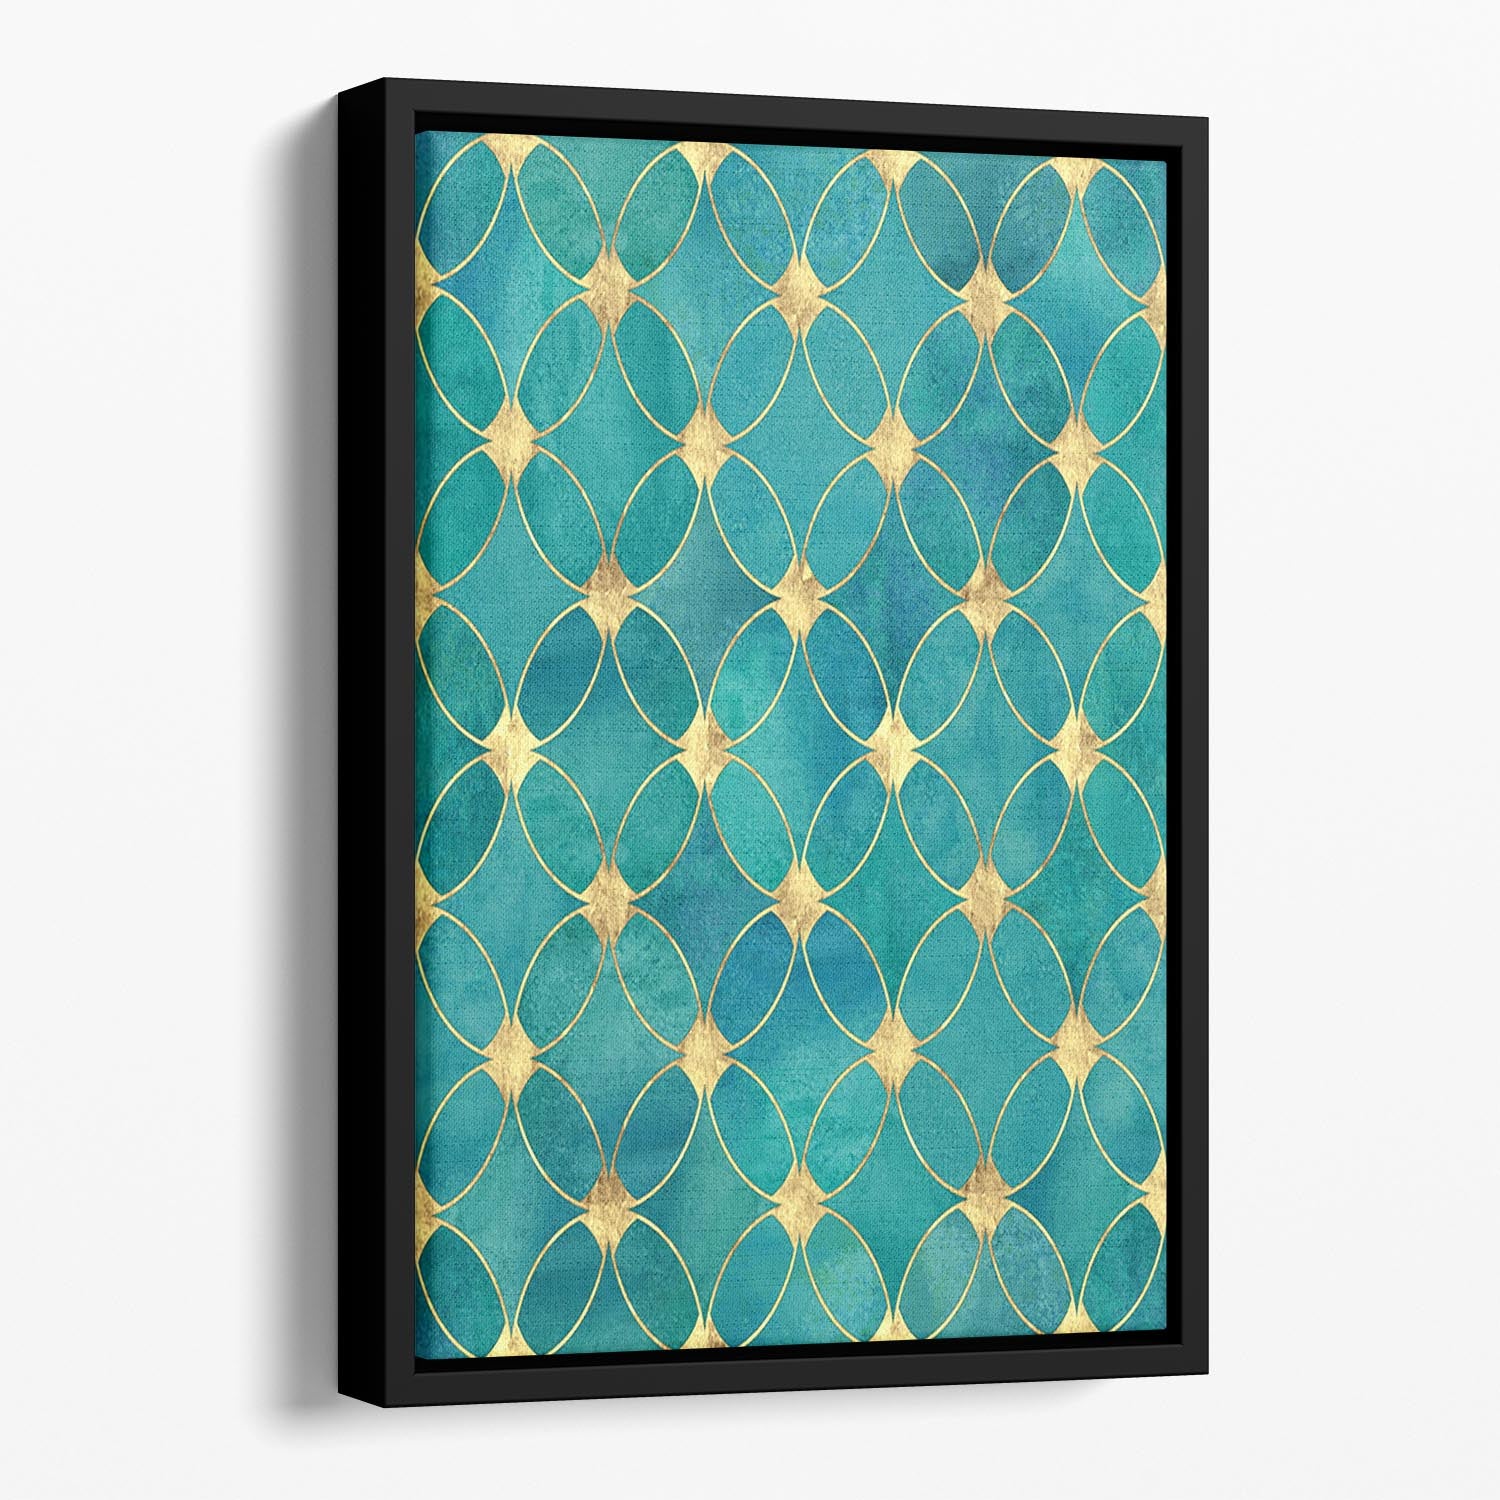 Teal and Gold Abstract Pattern Floating Framed Canvas - Canvas Art Rocks - 1